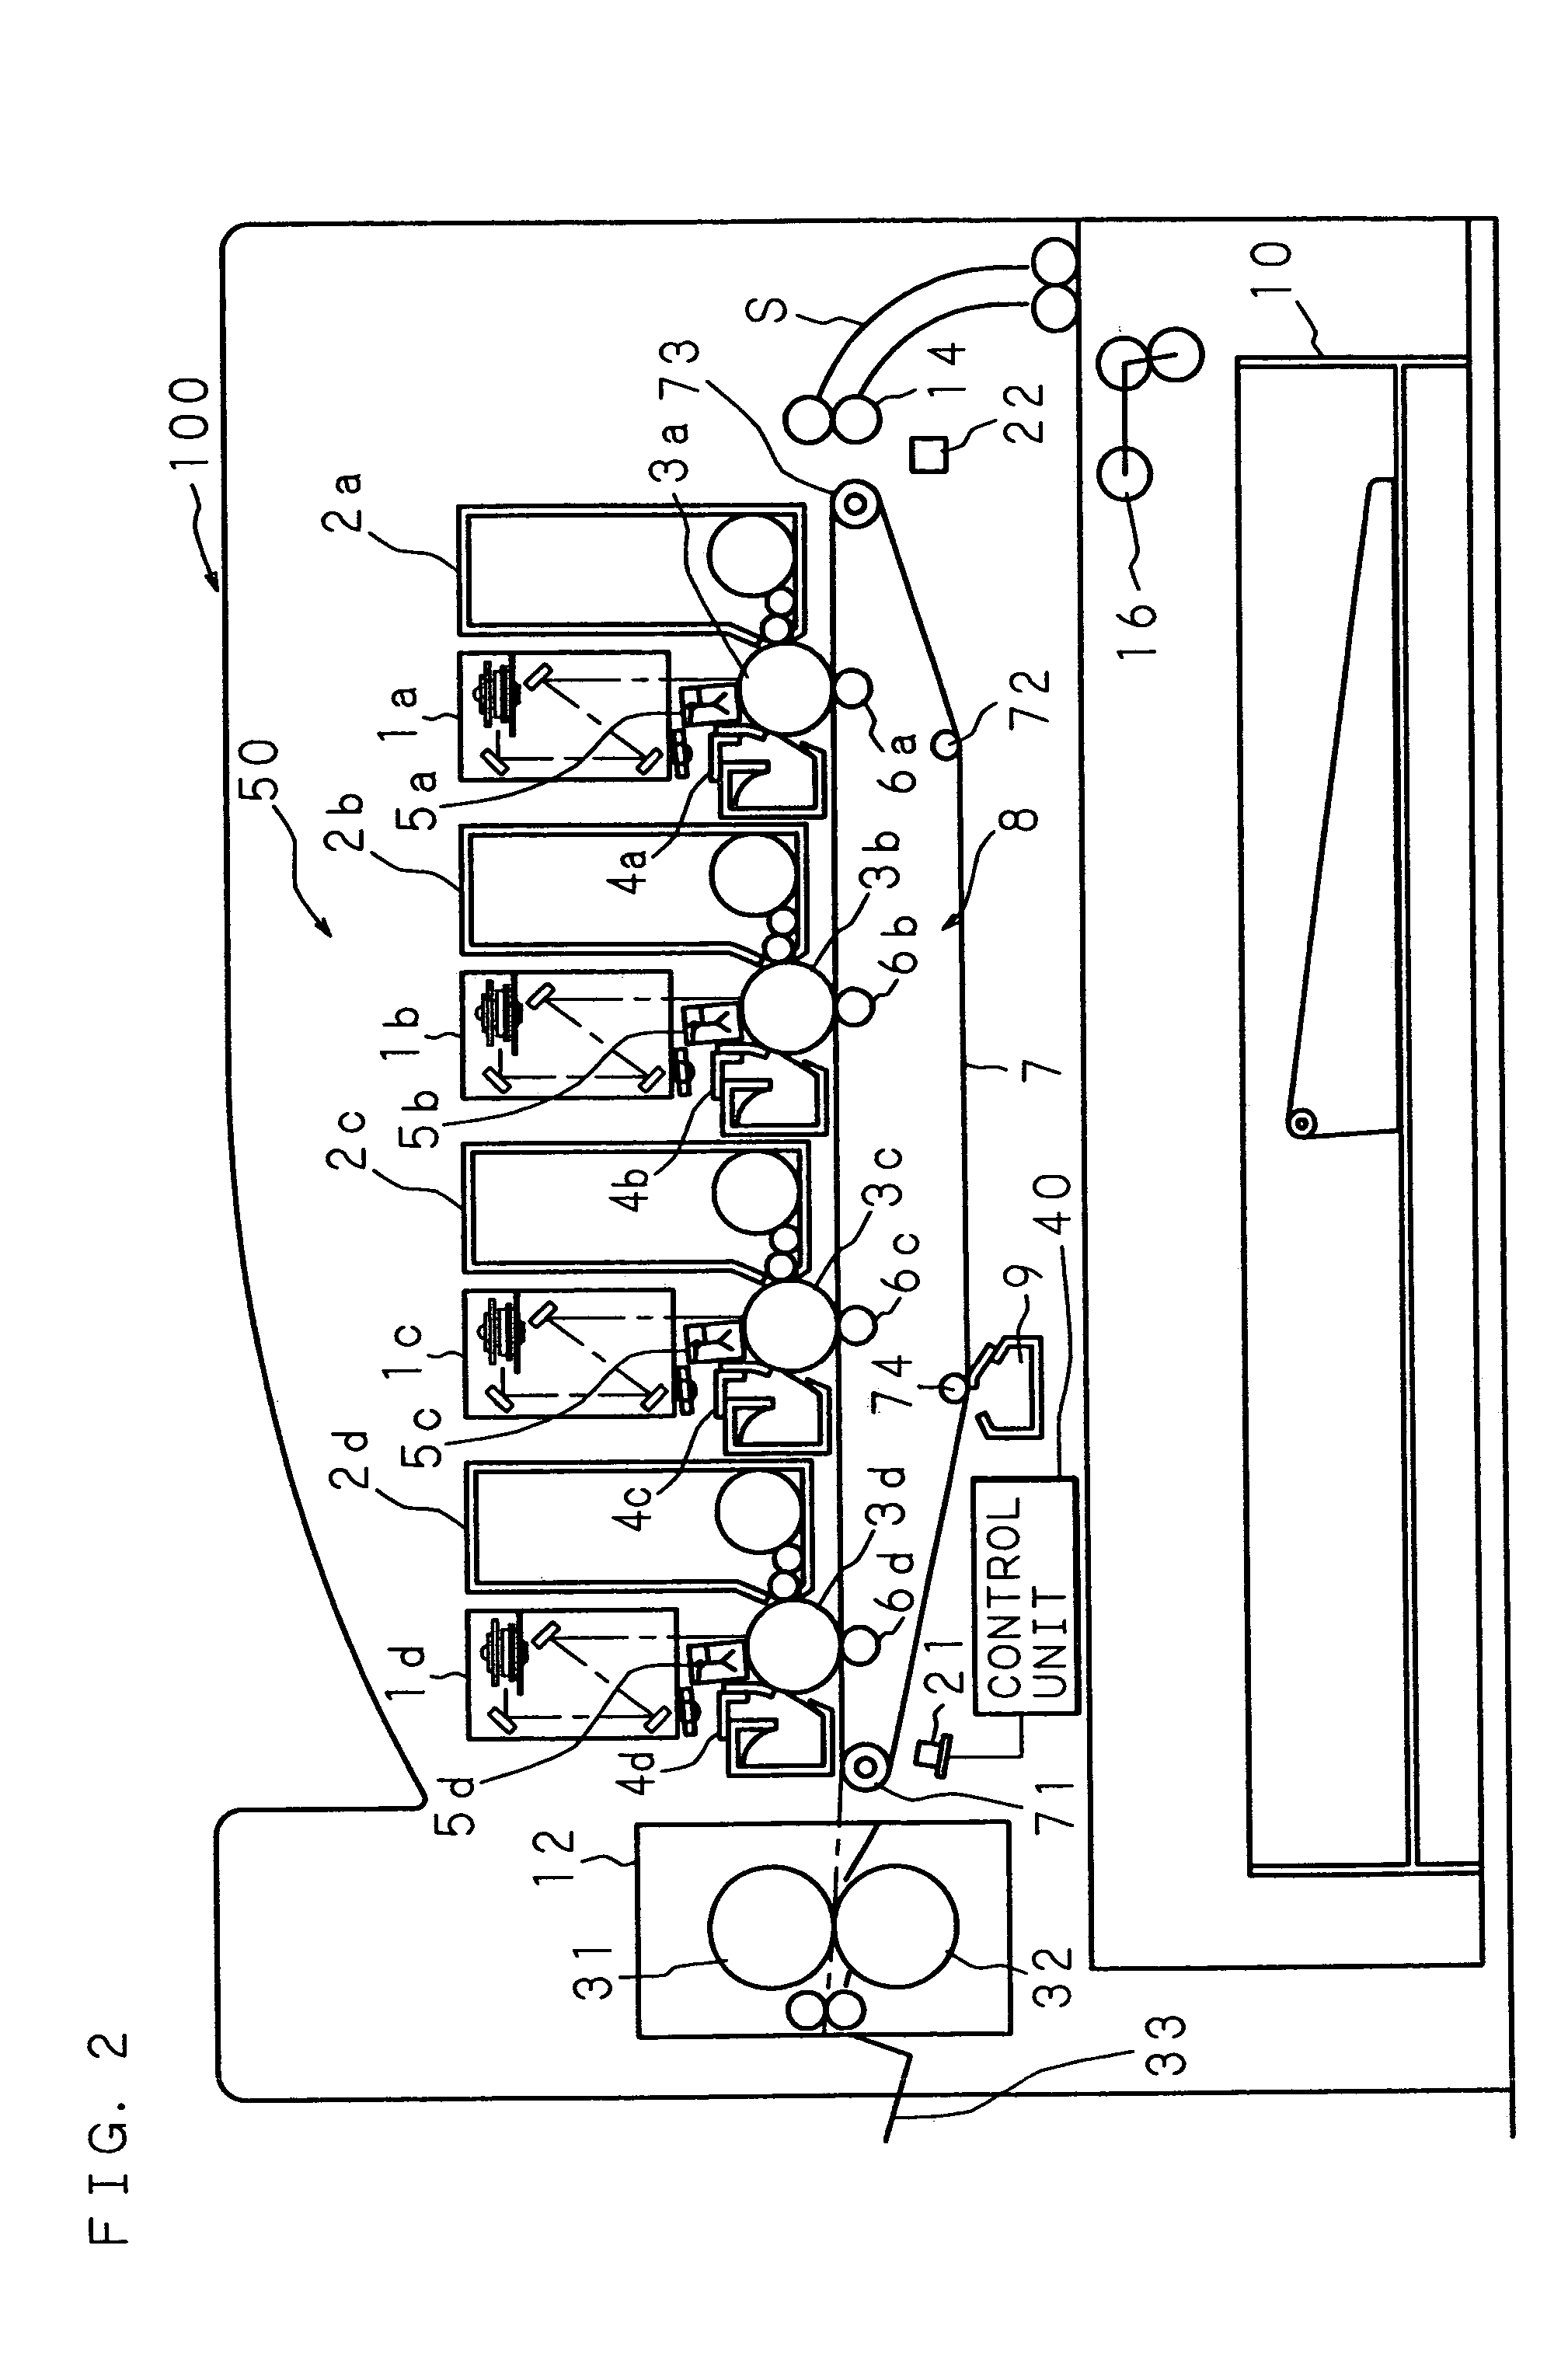 Image adjustment method and image forming apparatus